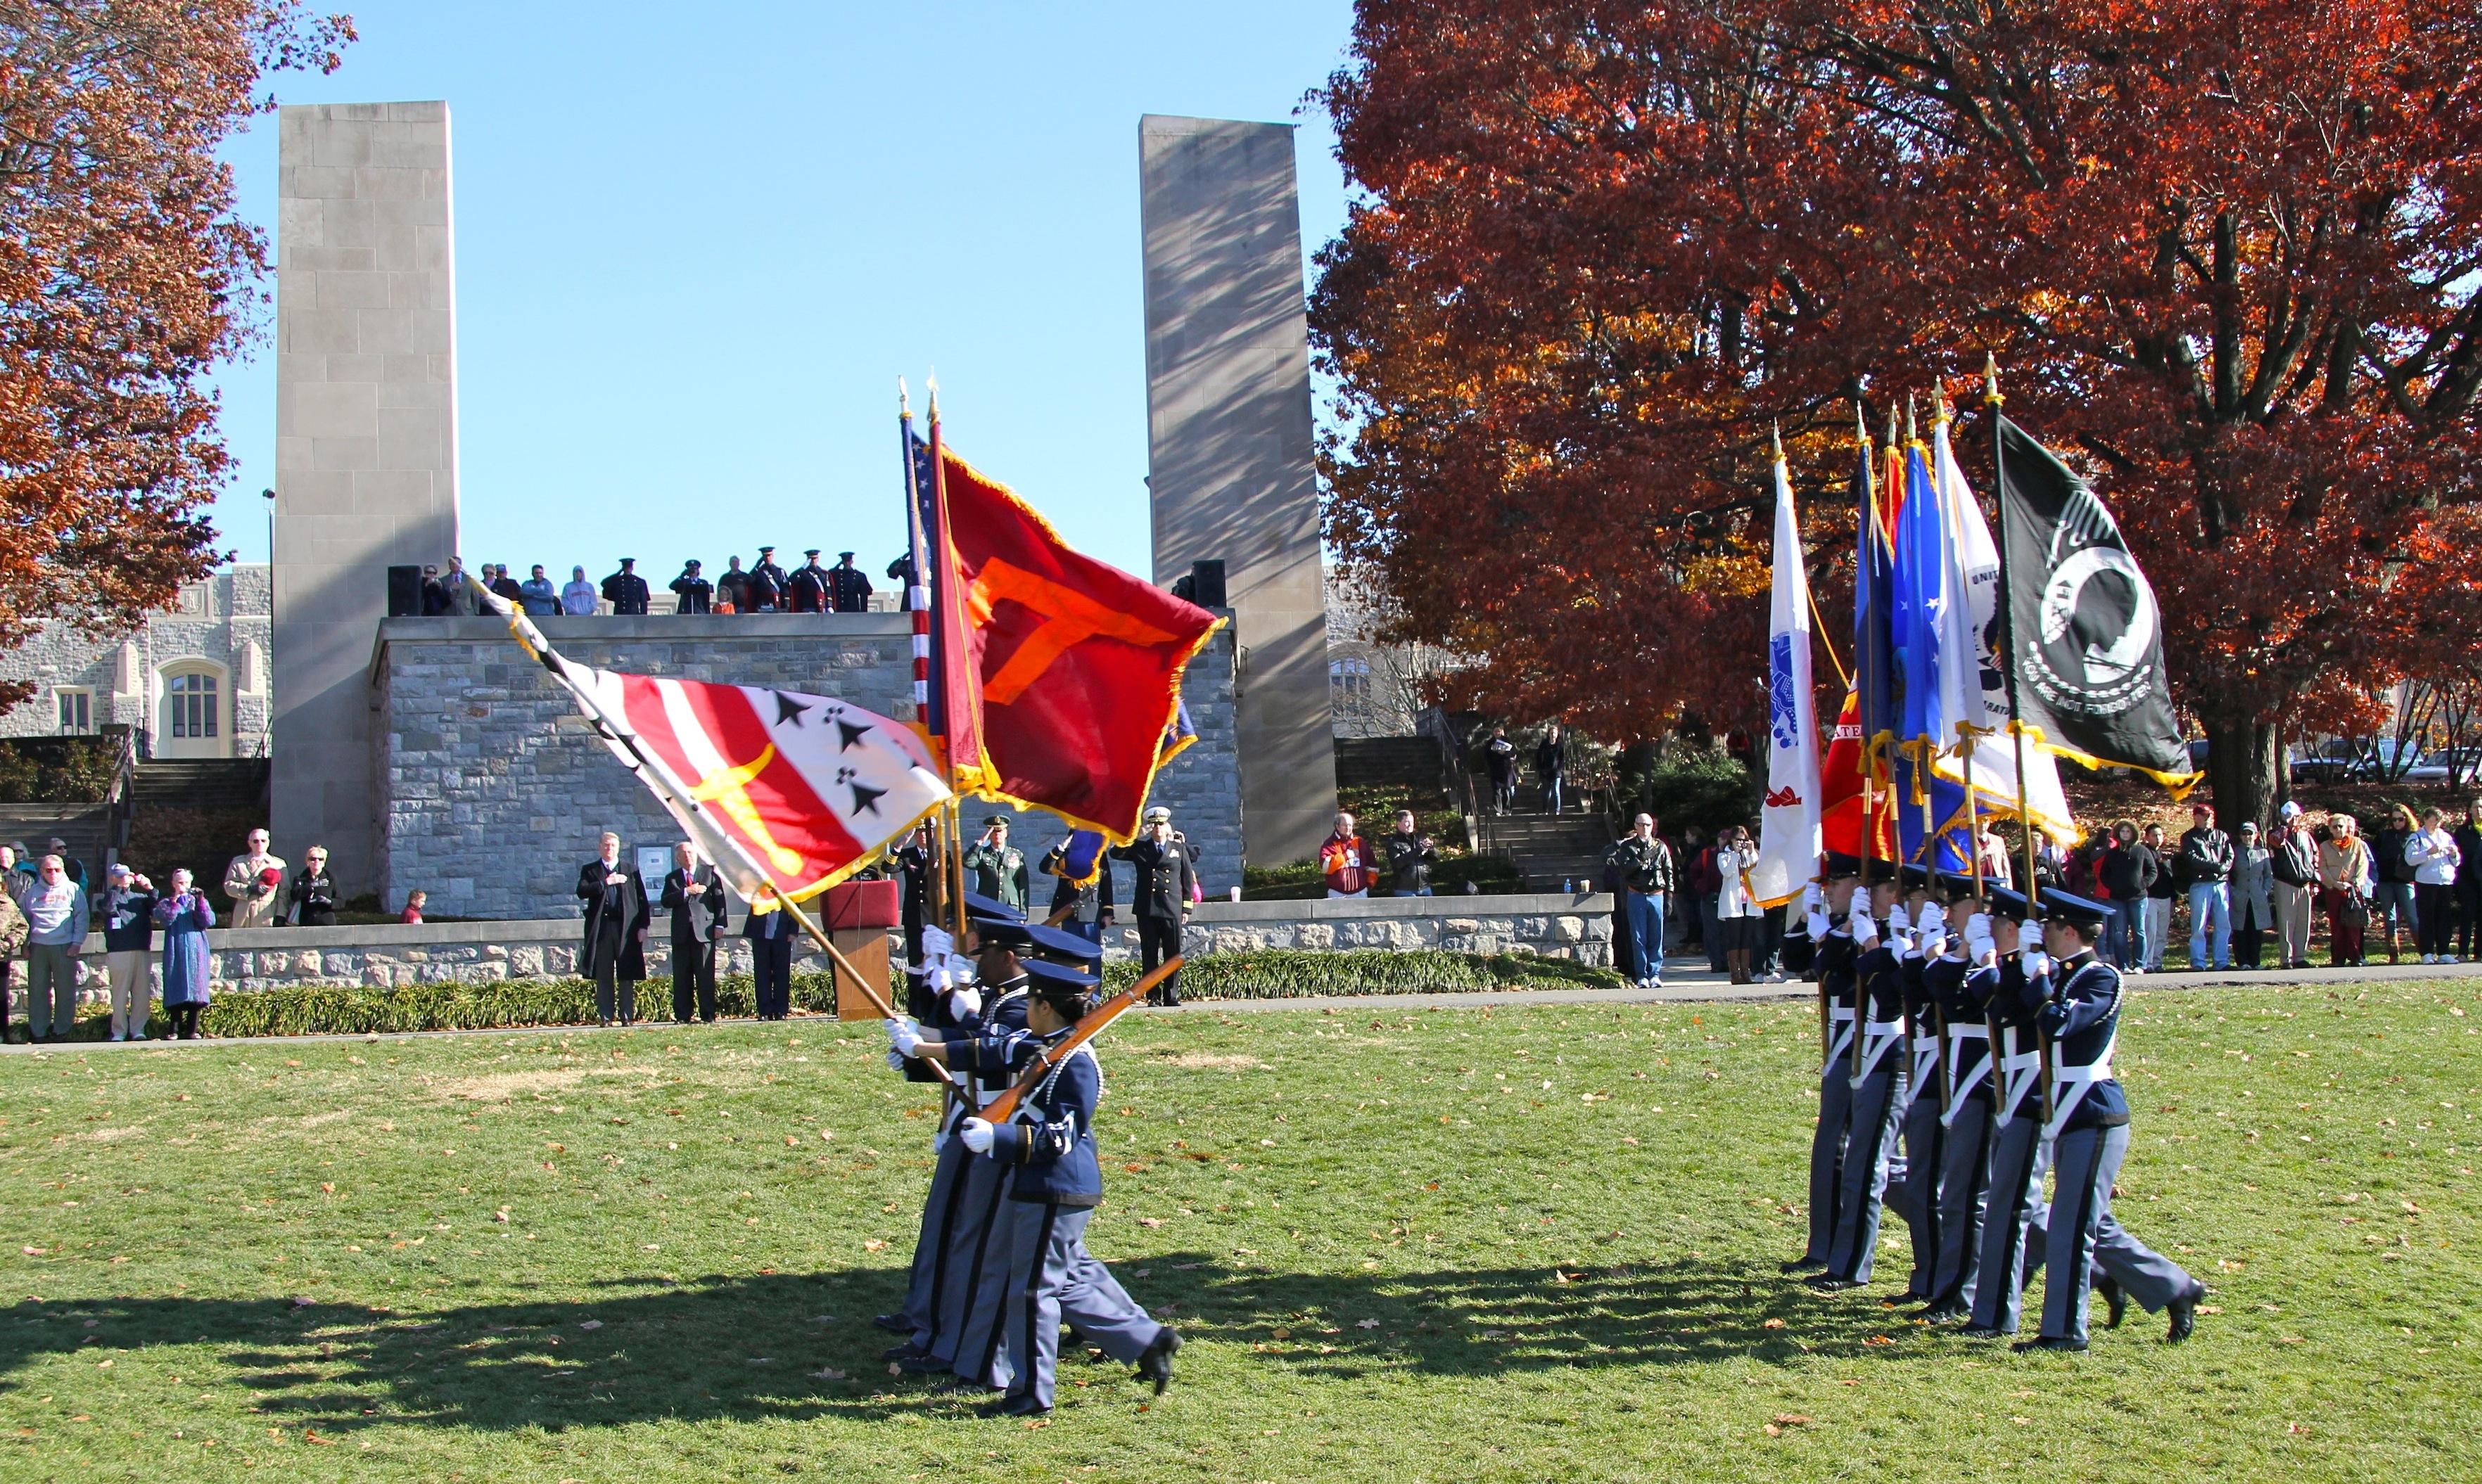 The Virginia Tech Corps of Cadets Color Guard marches in review past the War Memorial Chapel last November.